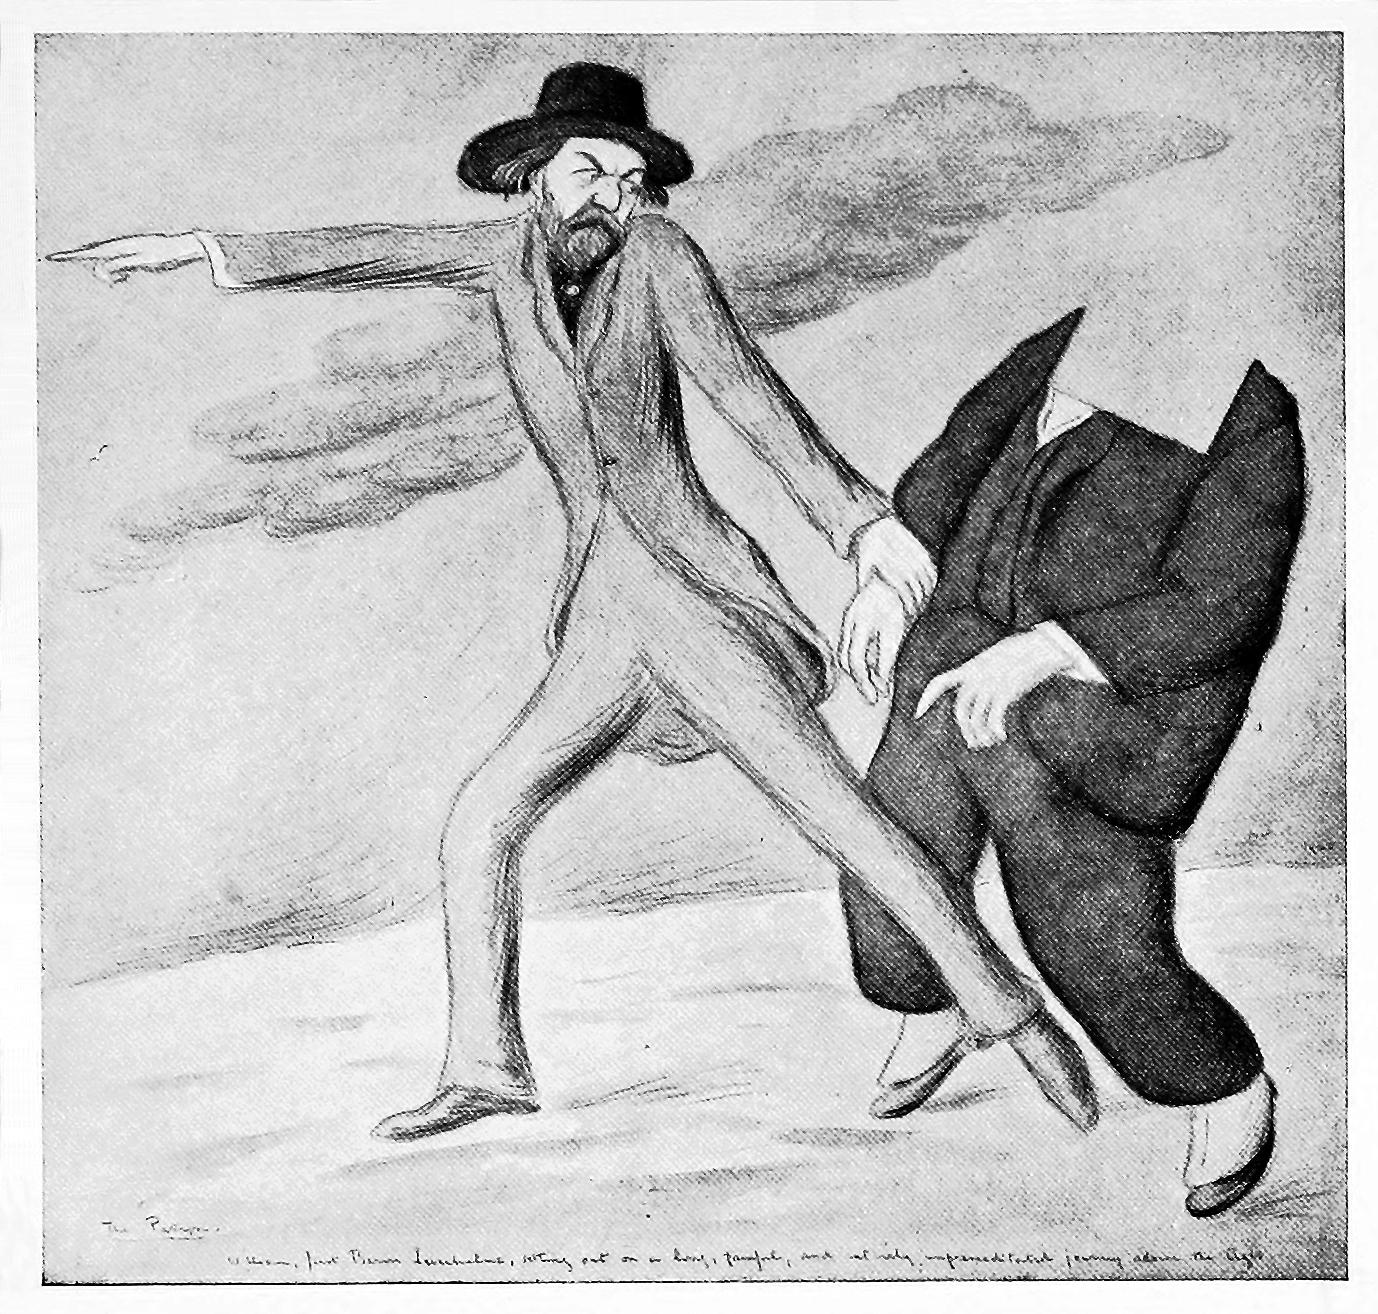 artwork - pencil drawing of a man pointing to the left looking back at a headless body